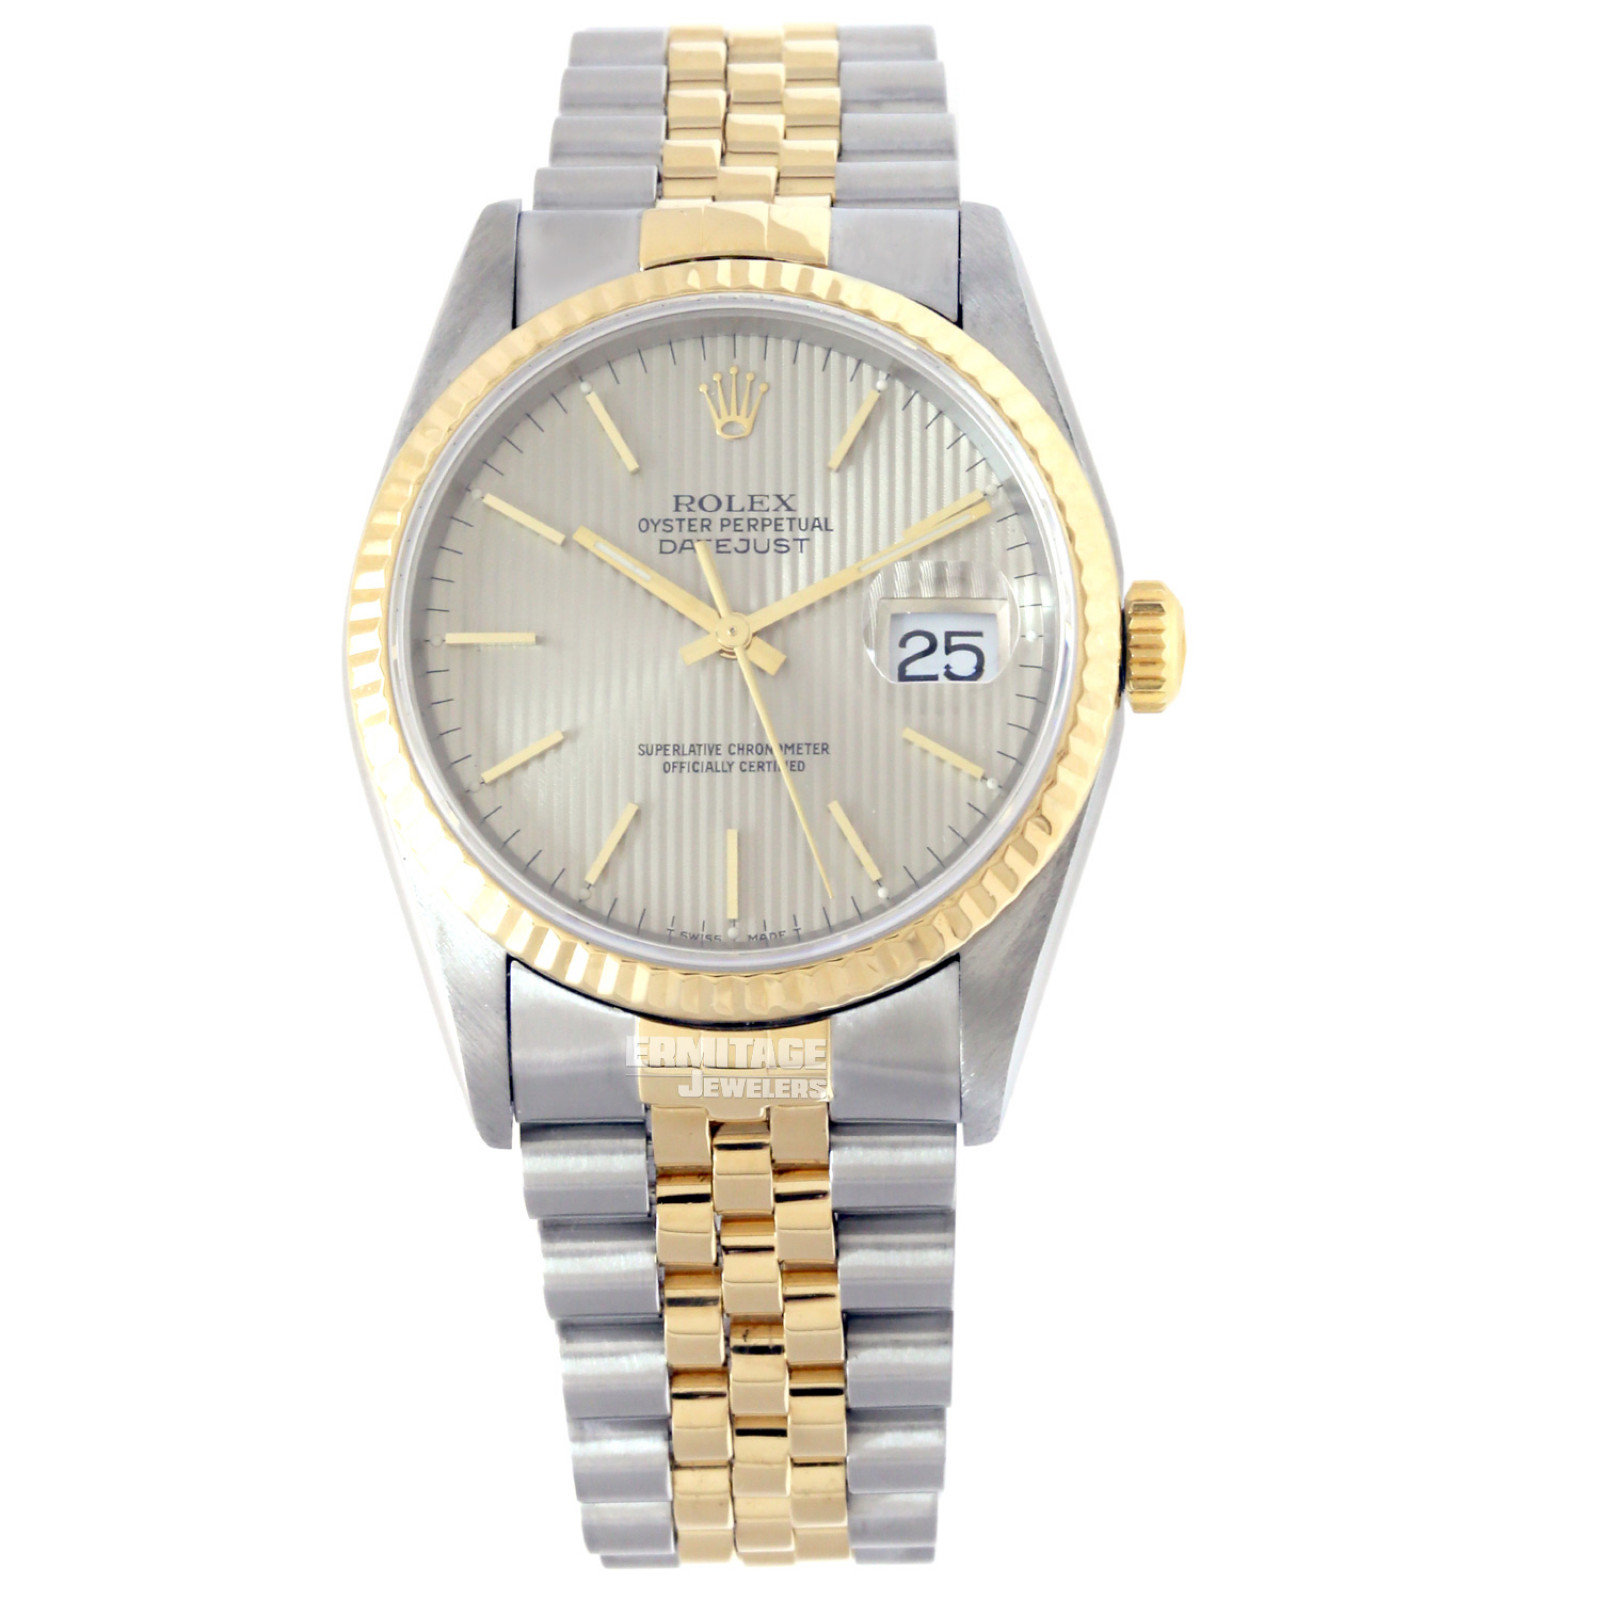 Tapestry Style Rolex Datejust 16233 Two Tone